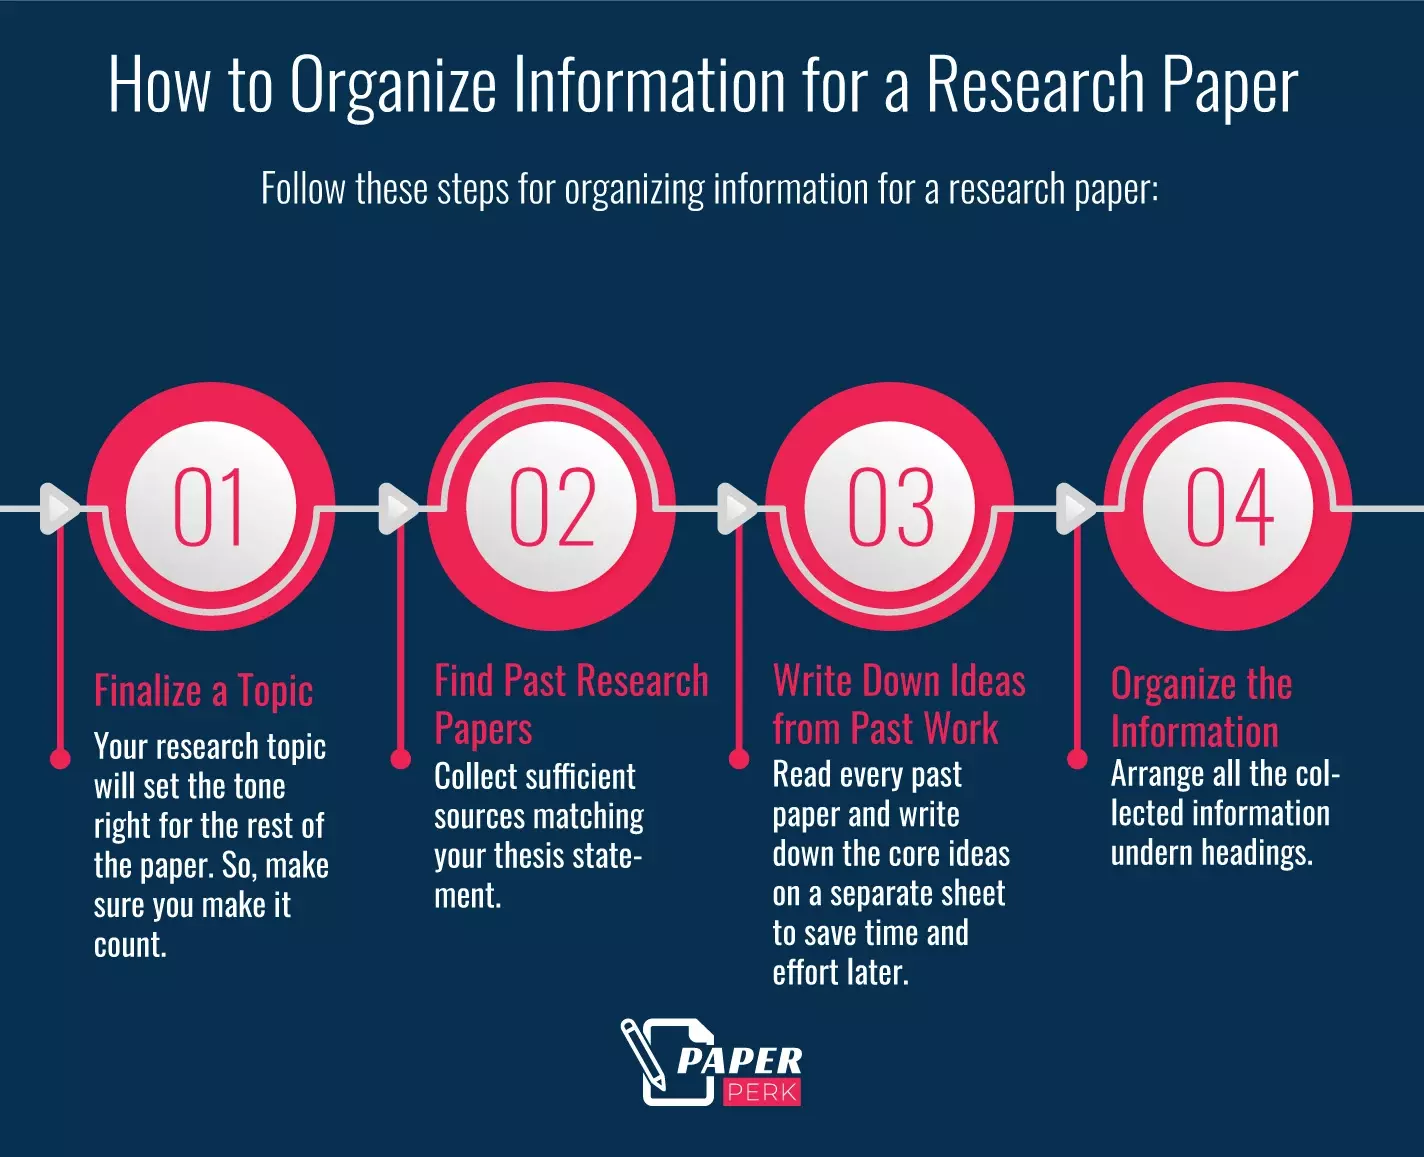 How to Organize Information for a Research Paper